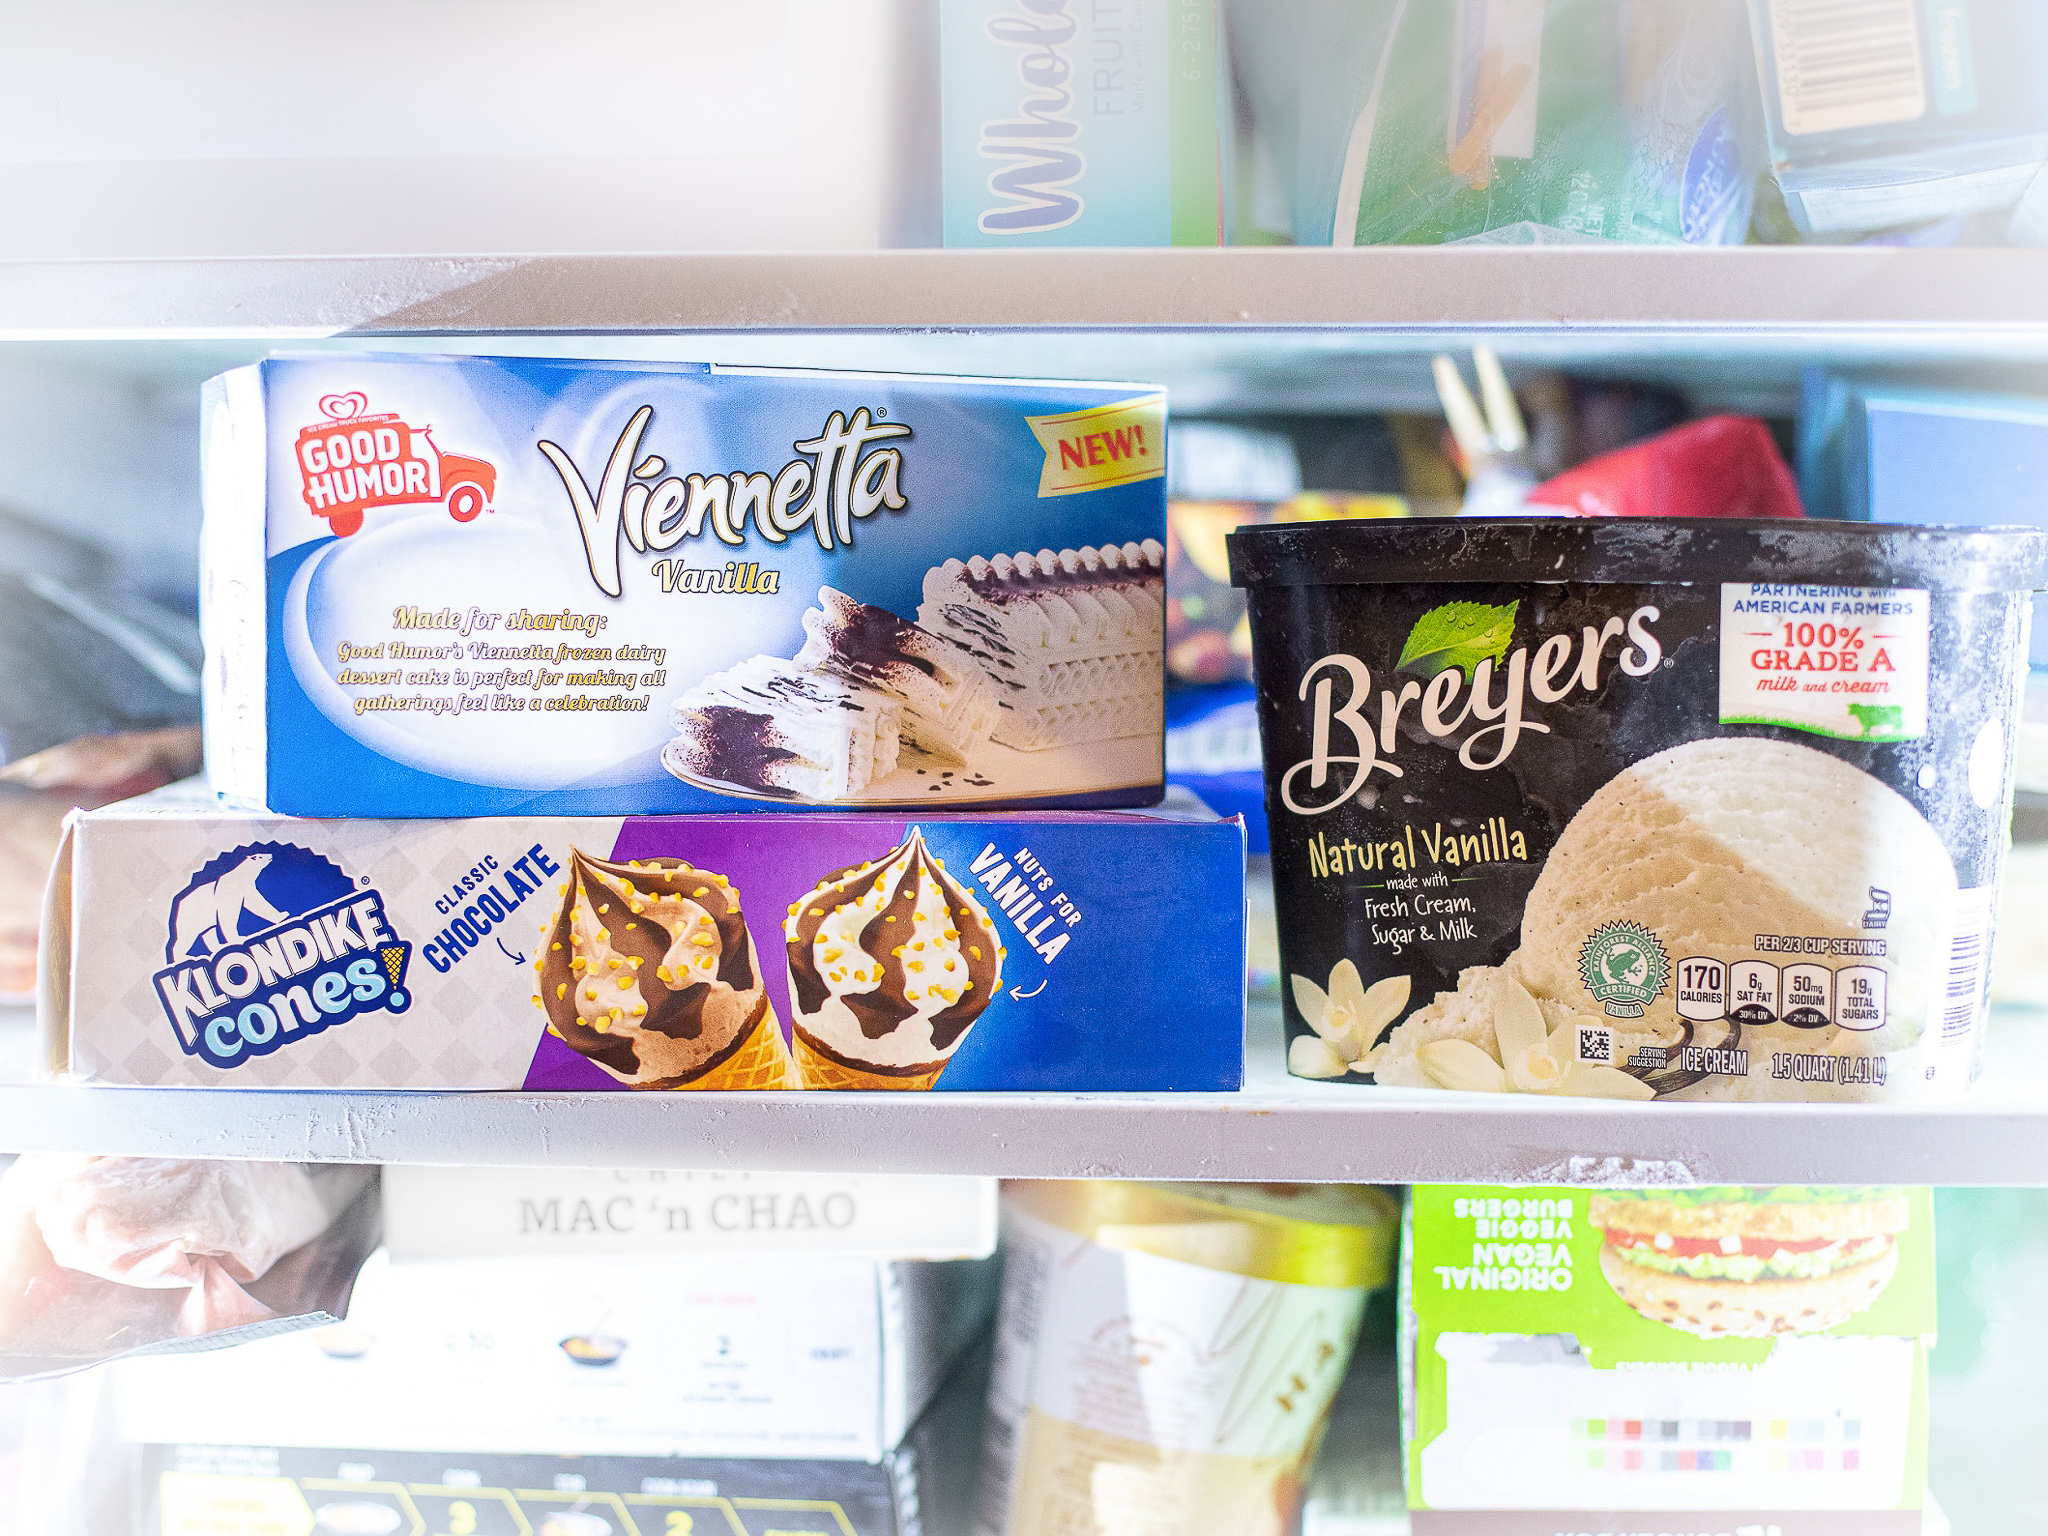 Celebrate Back To School With Tasty Treats From Breyers, Klondike & Viennetta Plus Earn Gift Cards With Your Purchase! on I Heart Publix